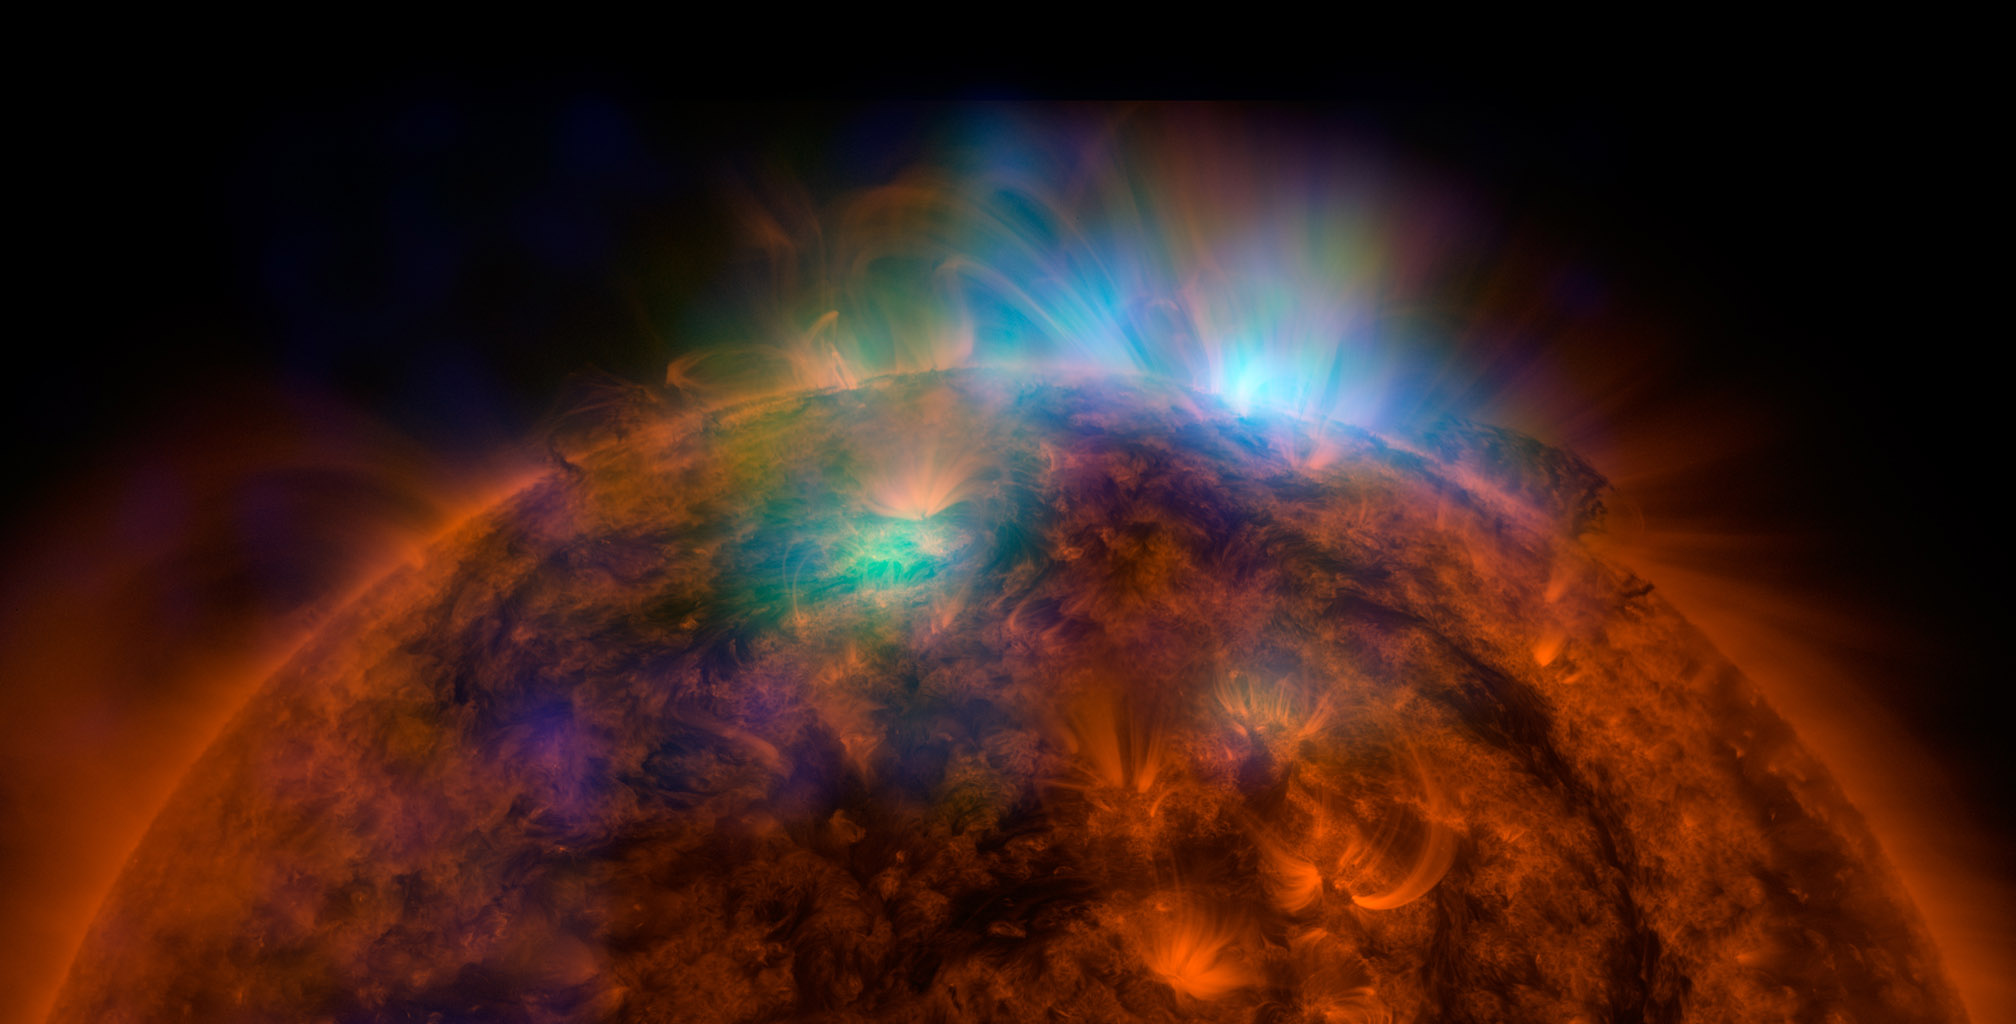 The Sun in X rays from NuSTAR